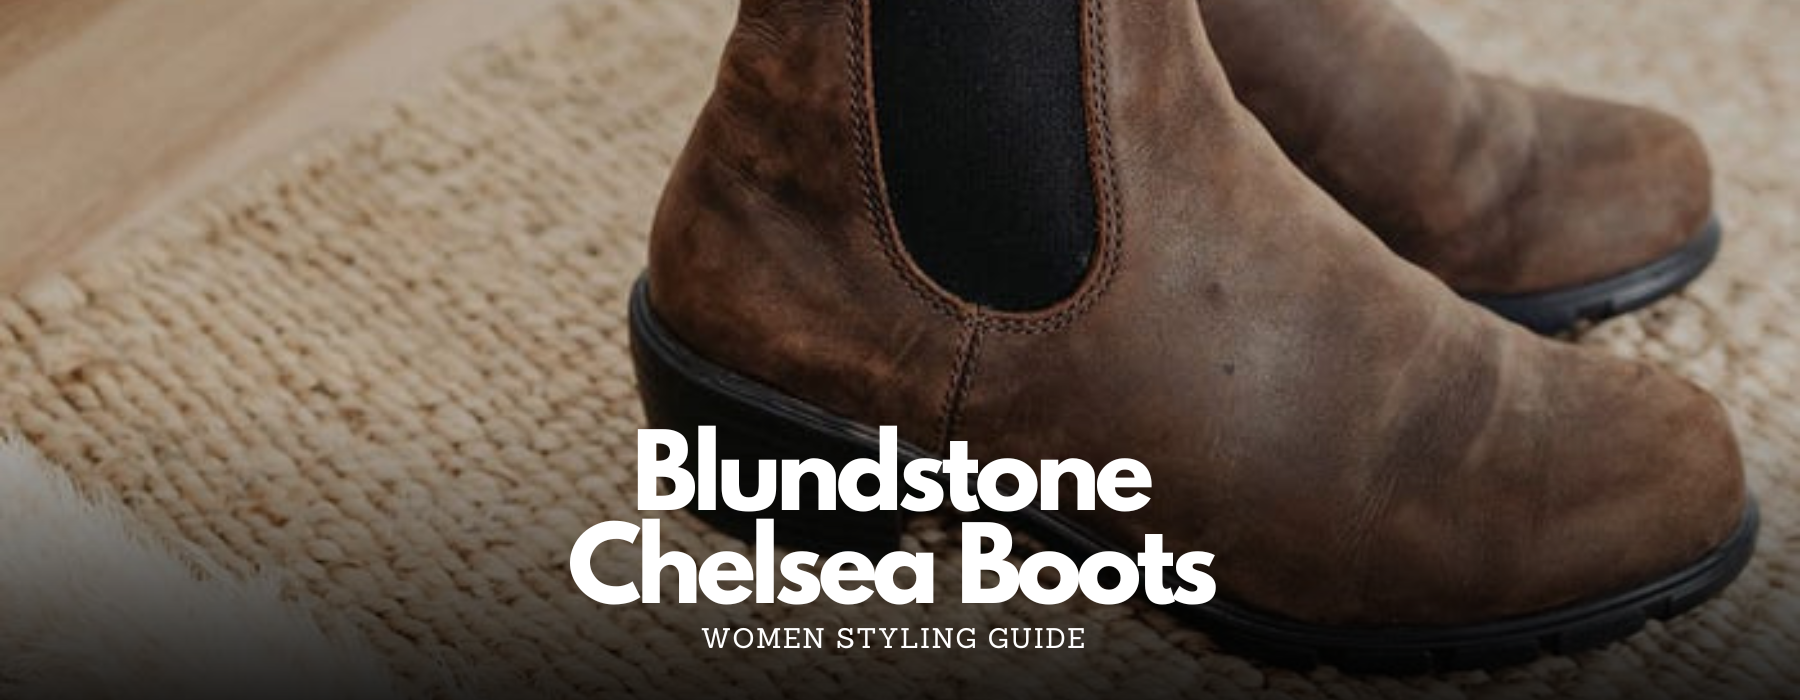 Women Styling Guide for Blundstone Chelsea Boots